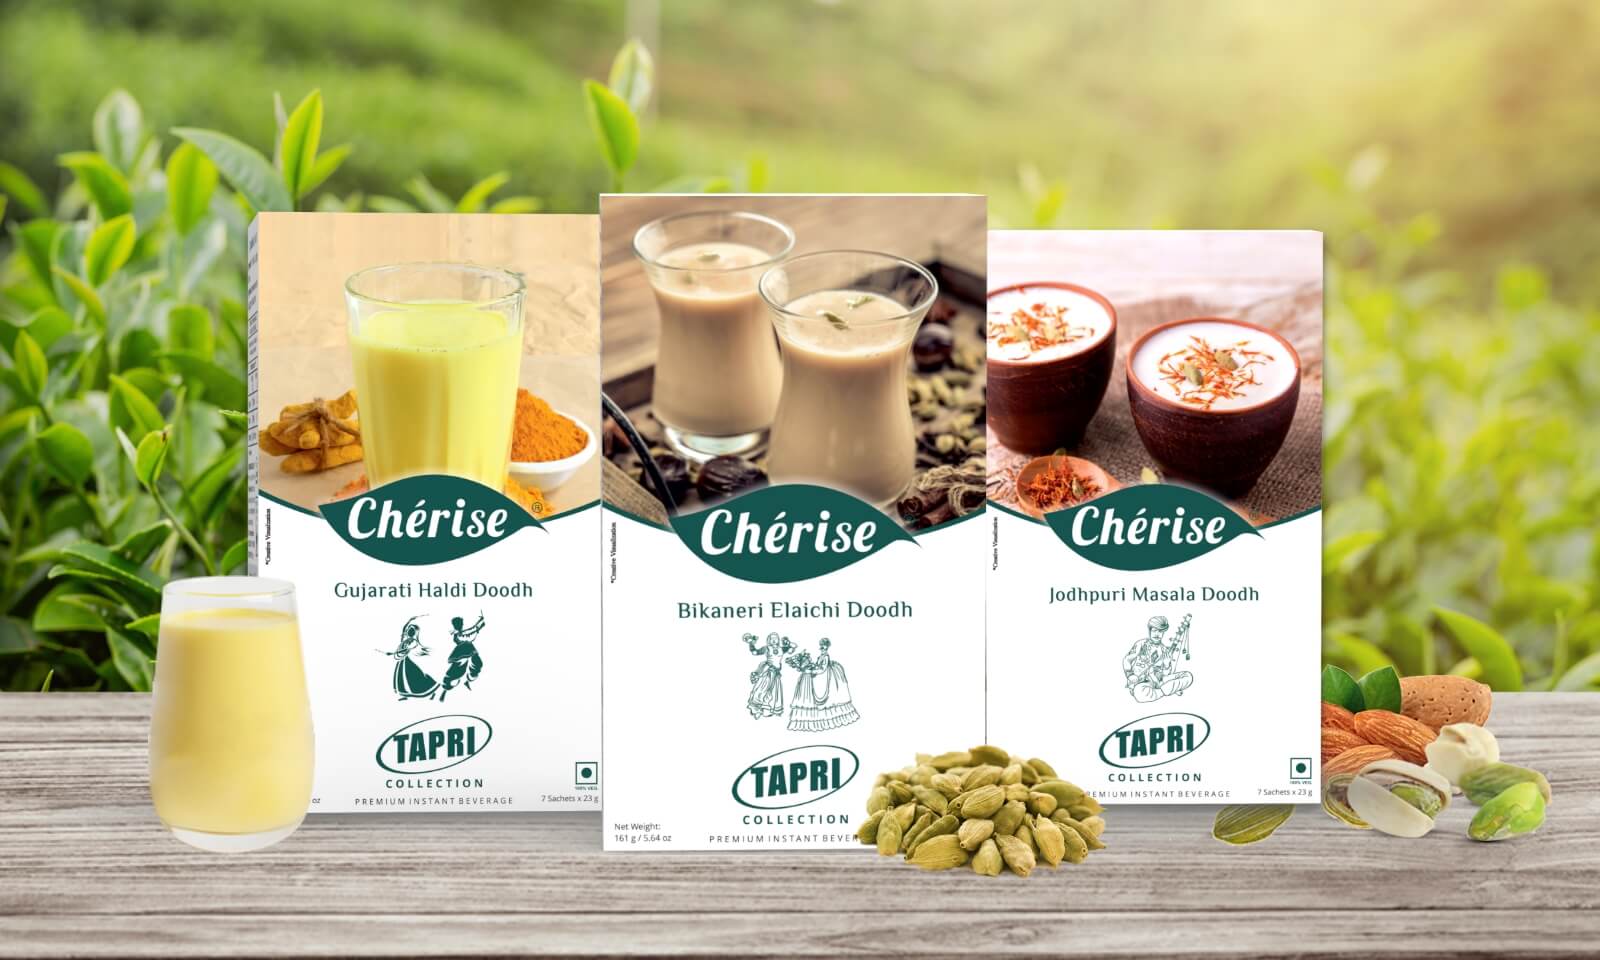 Must Try Refreshing Summer Instant Milk Beverages by Cherise